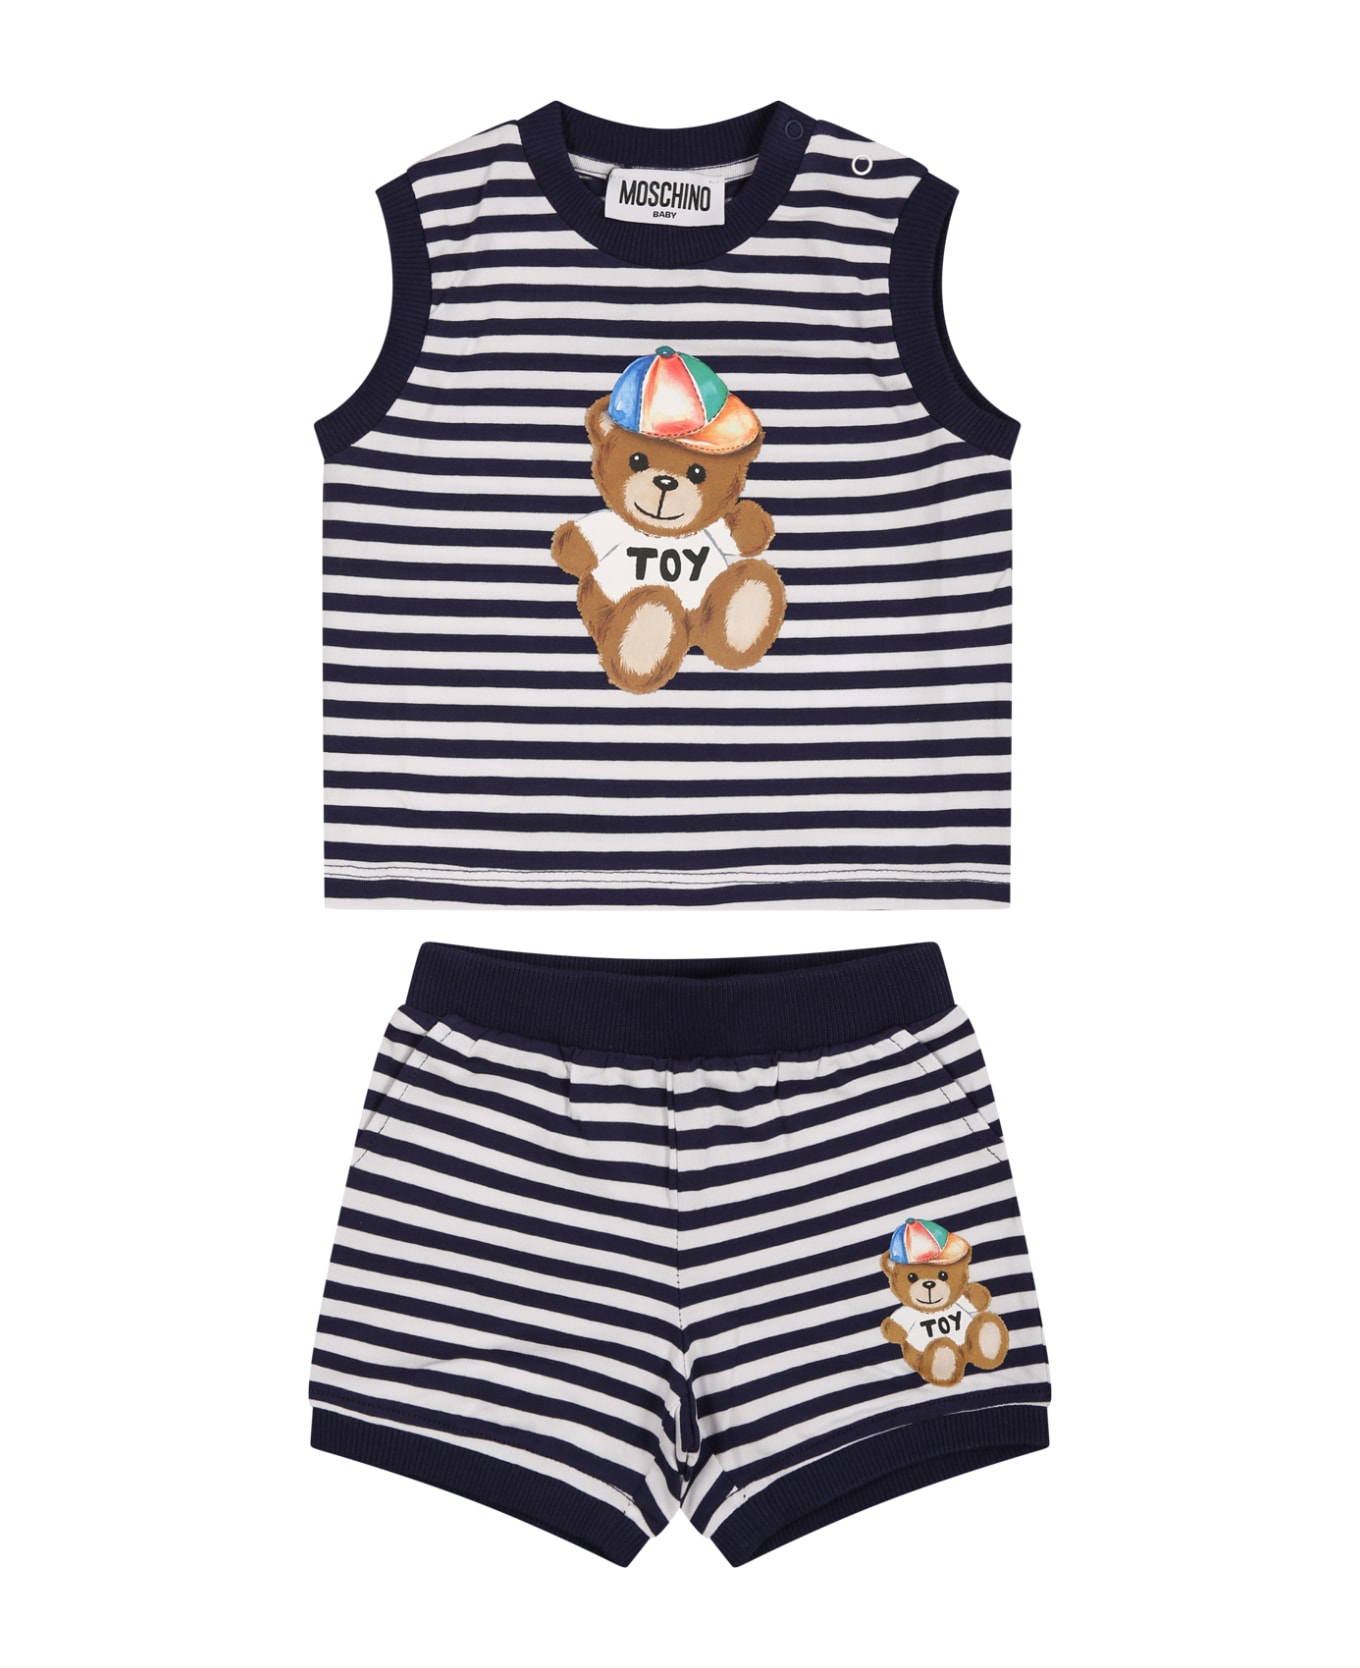 Moschino Blue Suit For Baby Boy With Teddy Bear - Blue ボトムス